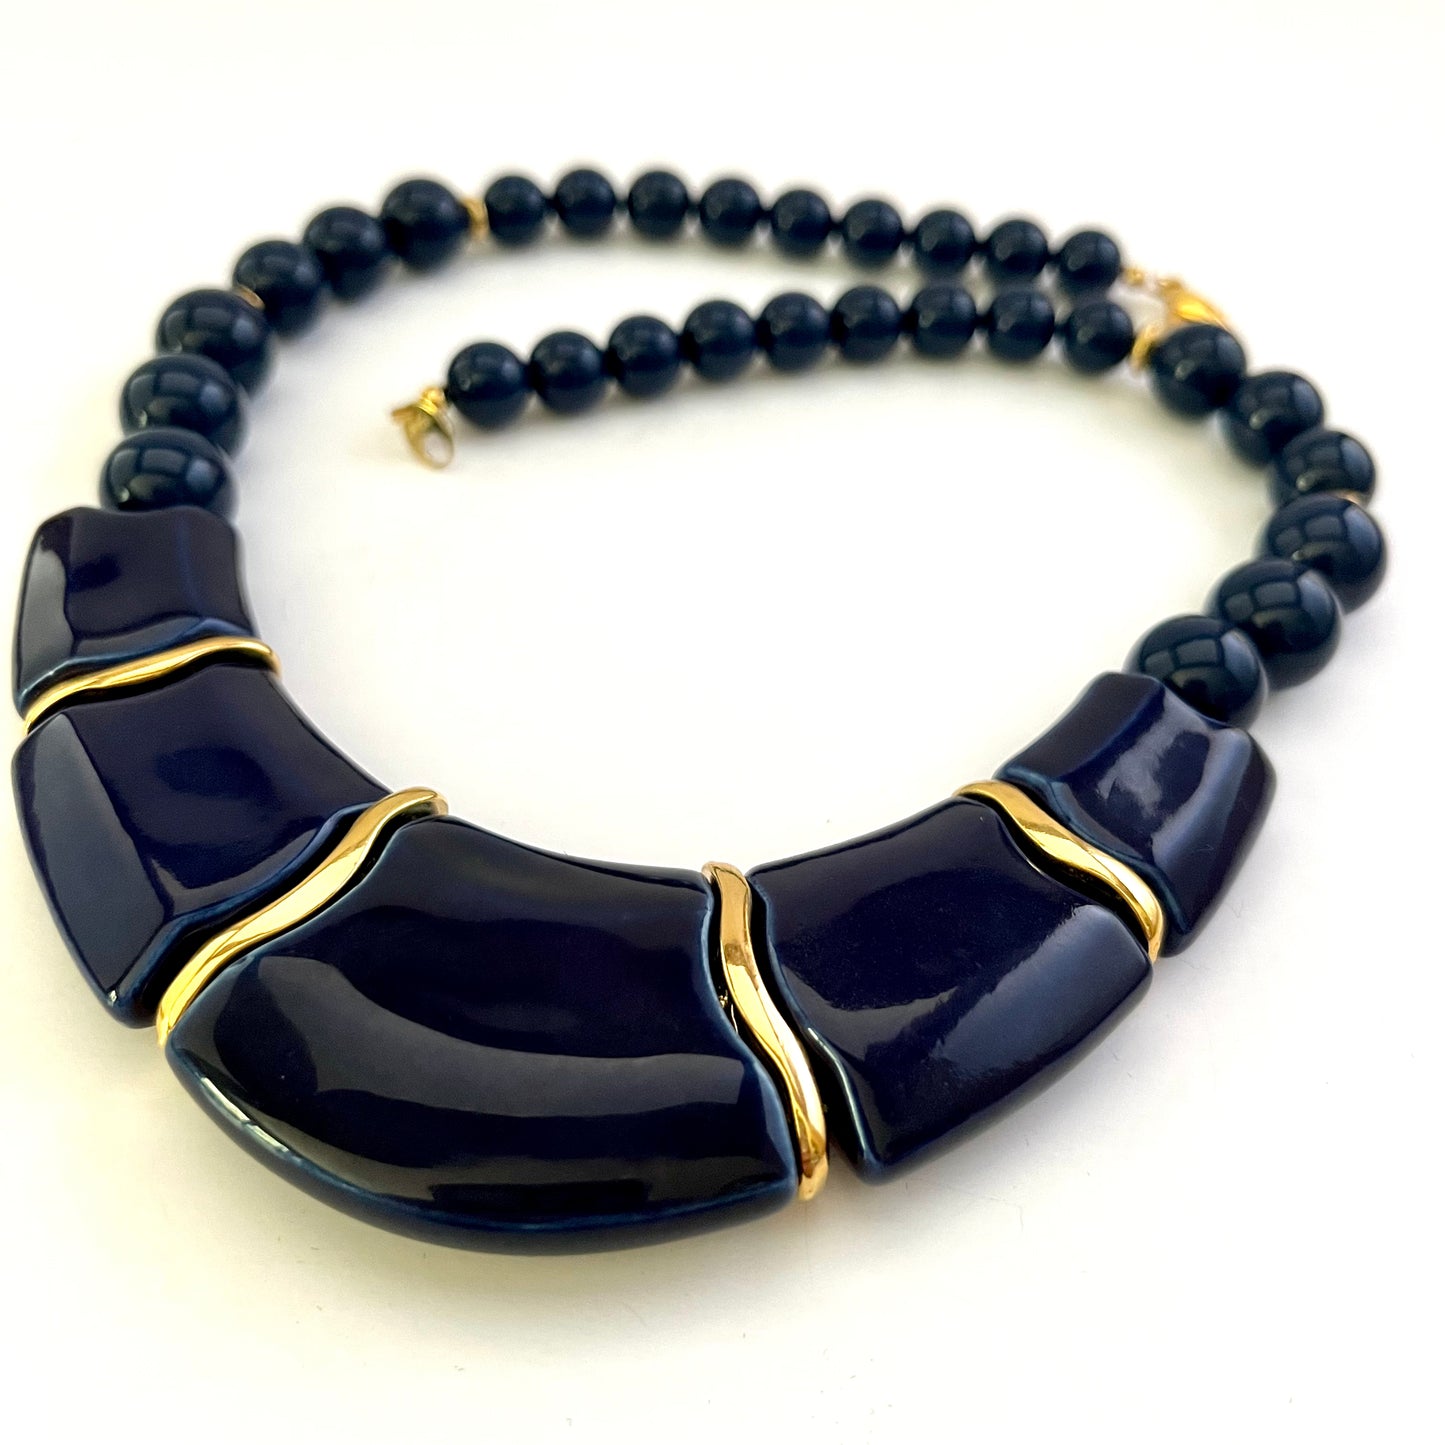 1980s Japan Bead Necklace